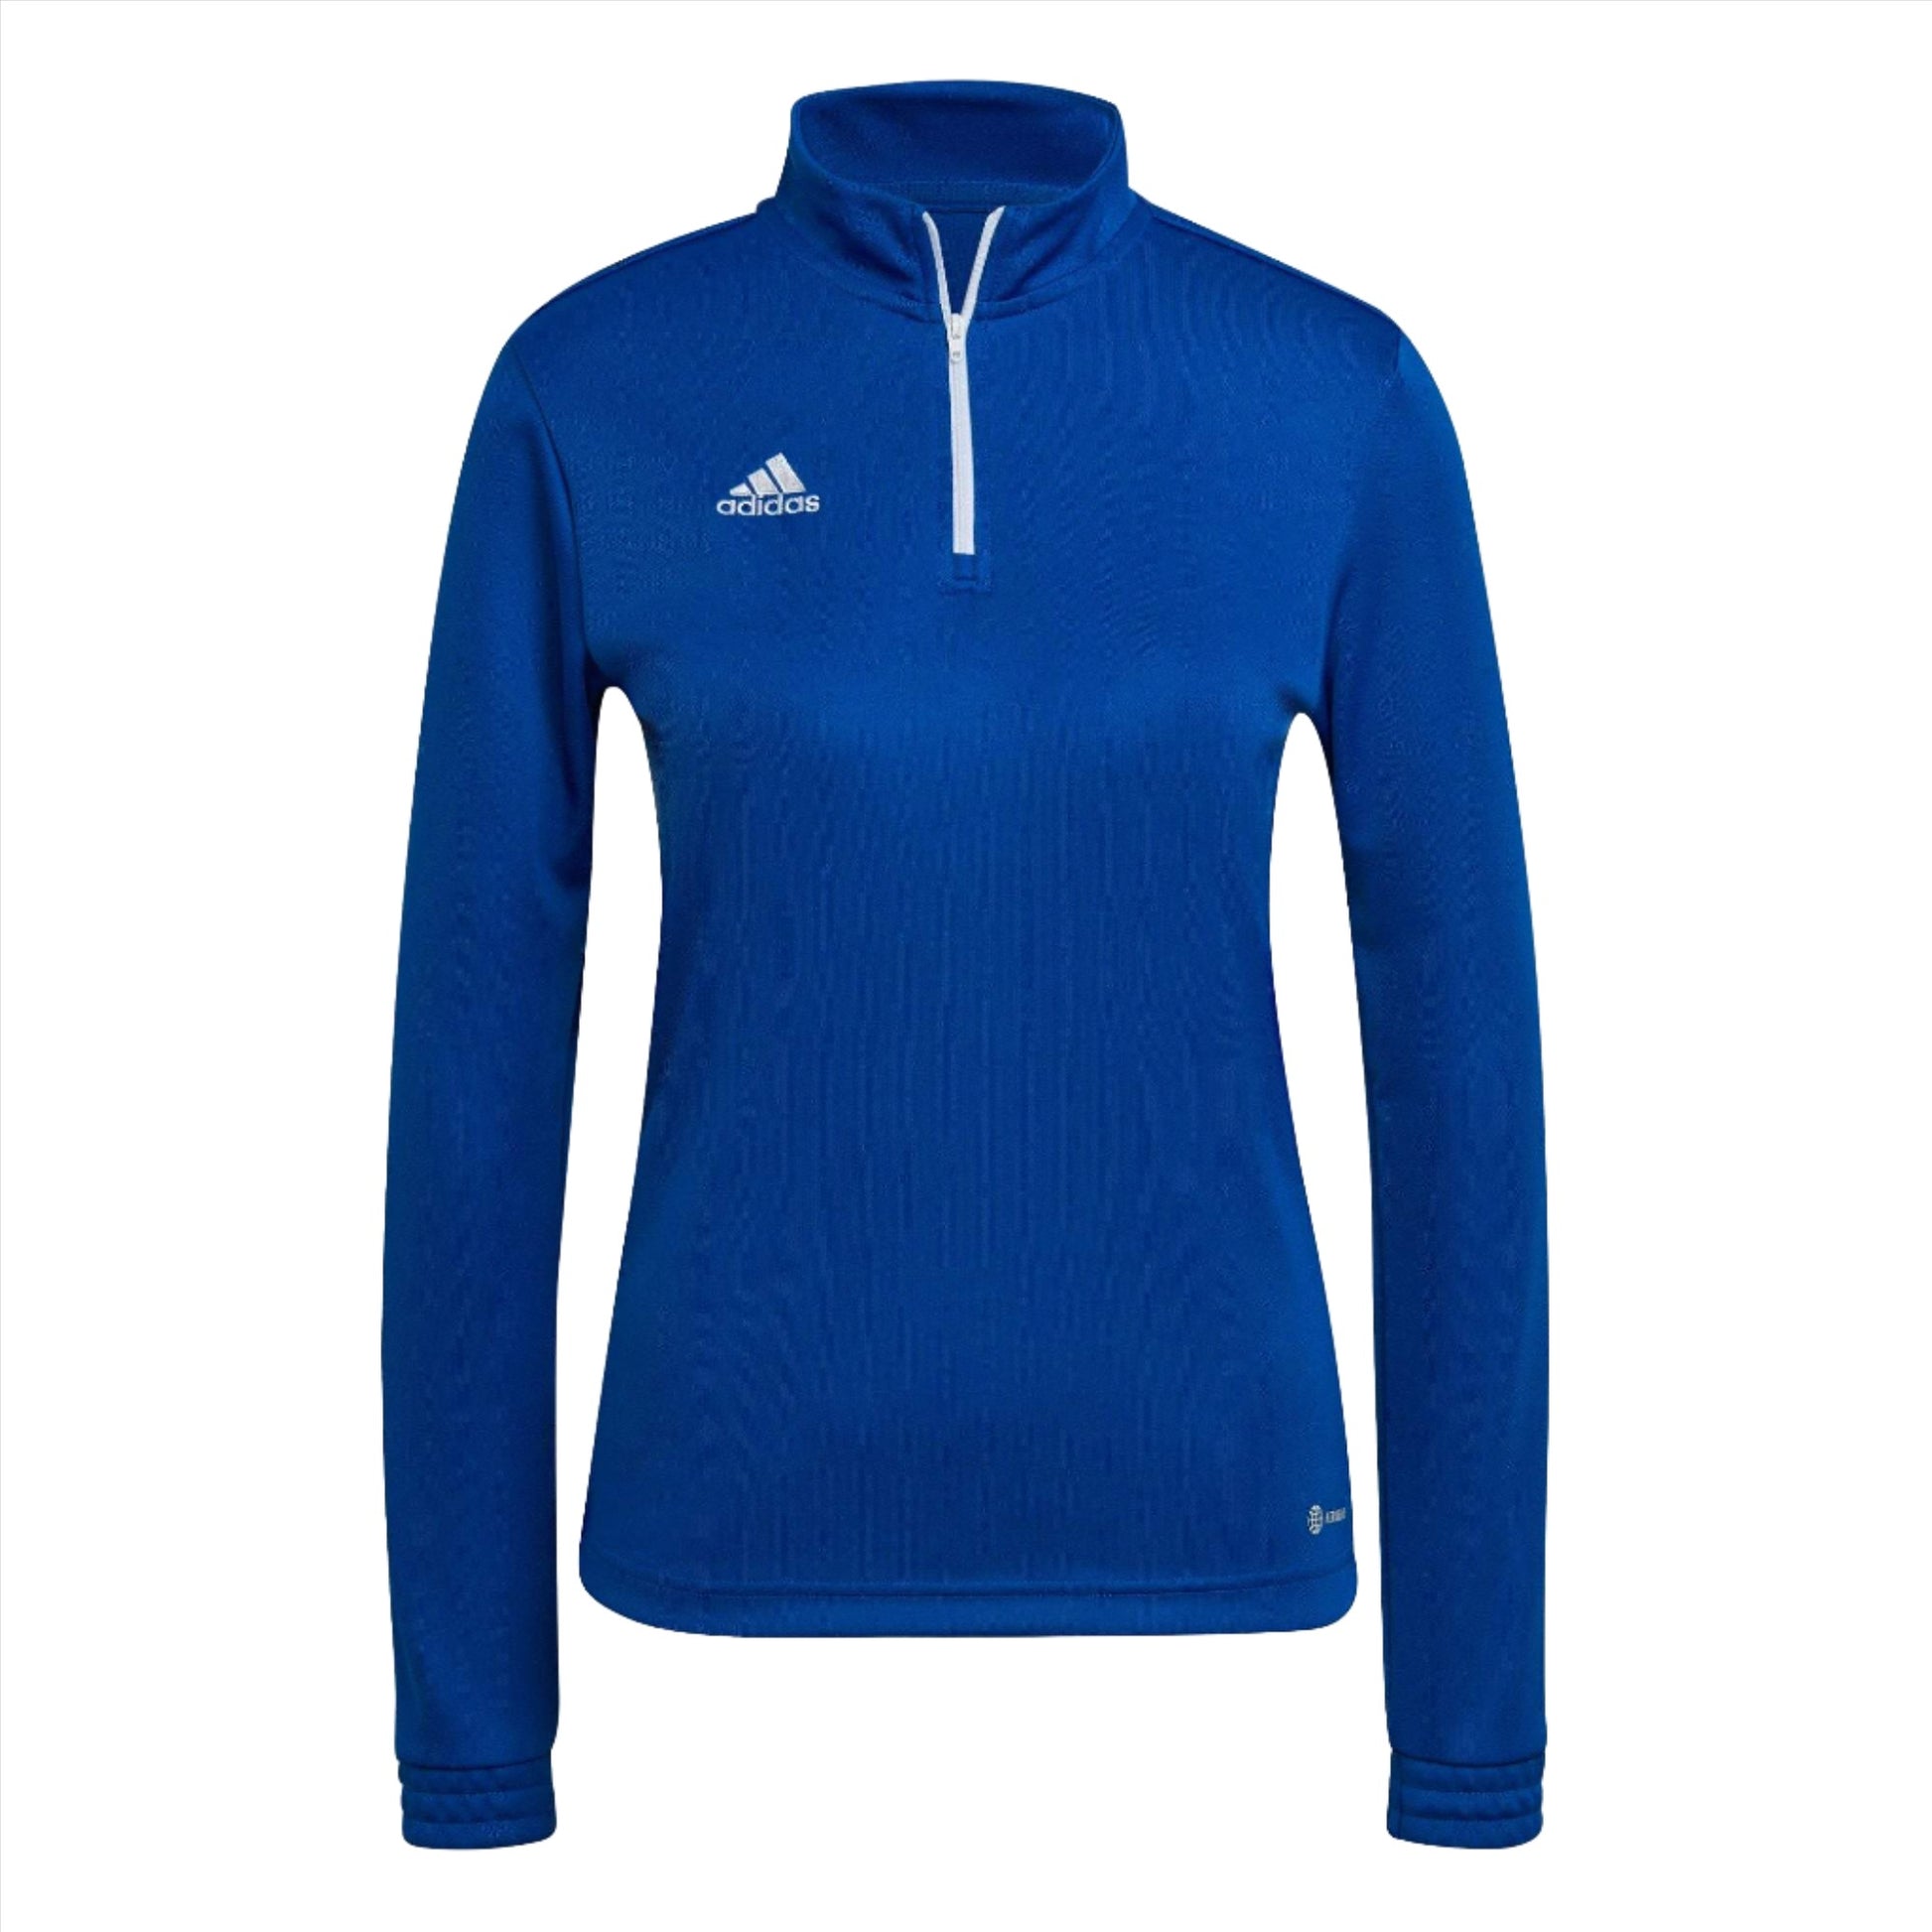 Entrada 22 Training Top Ladies by Adidas - The Luxury Promotional Gifts Company Limited